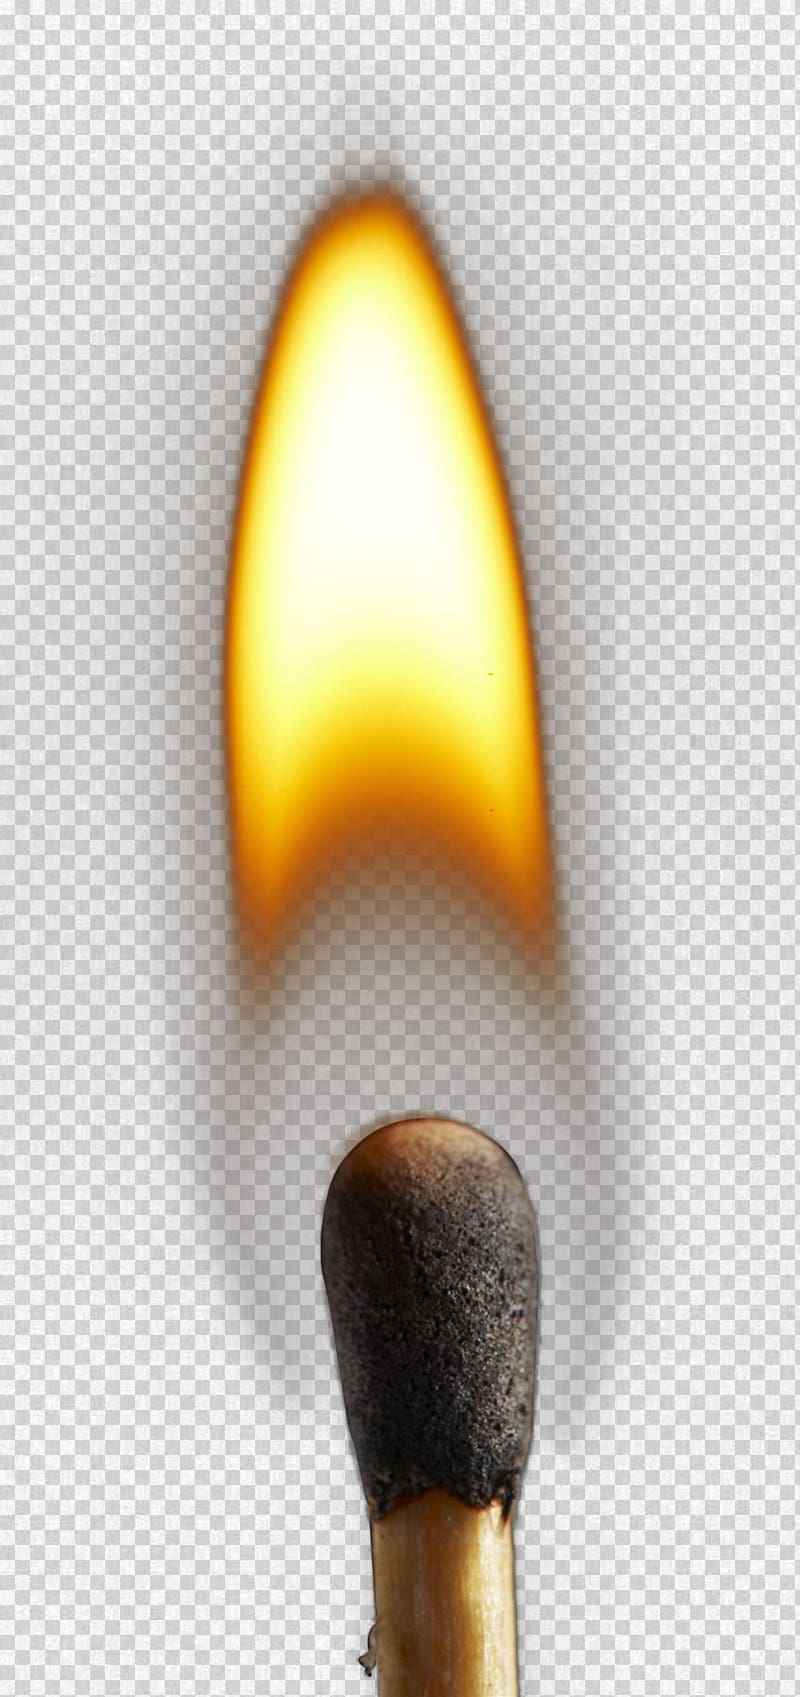 Lighted Match Match Fire Candle Football Lit Matches Transparent Background Png Clipart Hiclipart